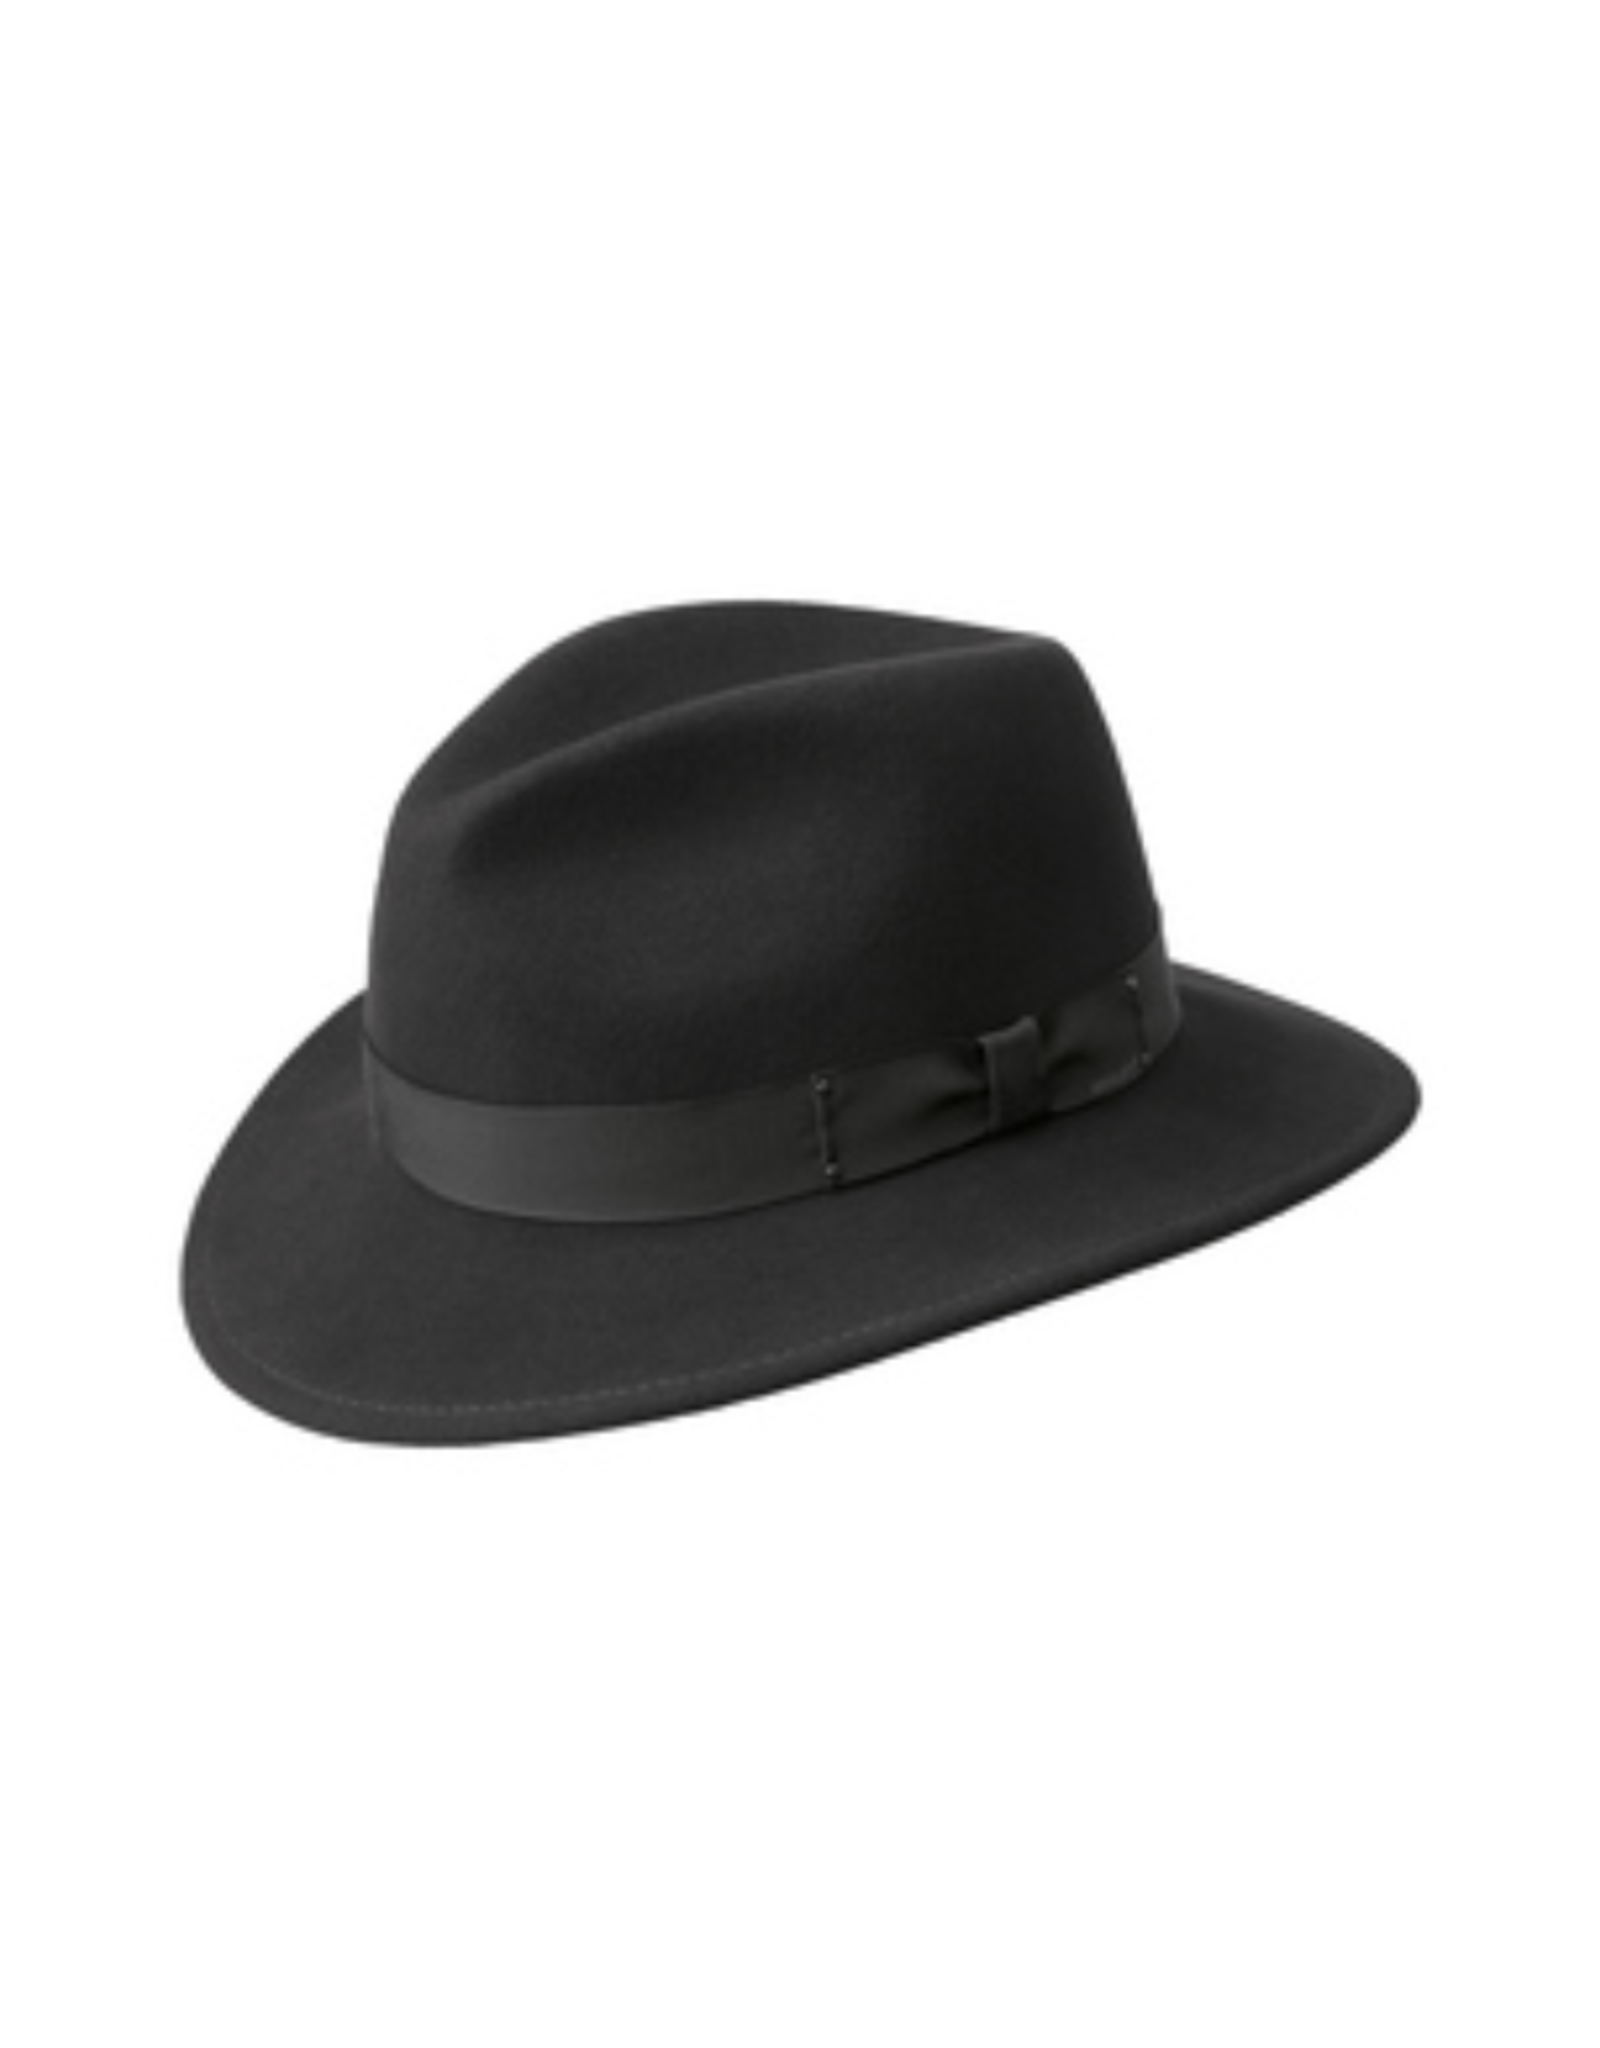 Bailey Hat Co. HAT-FEDORA "CURTIS"